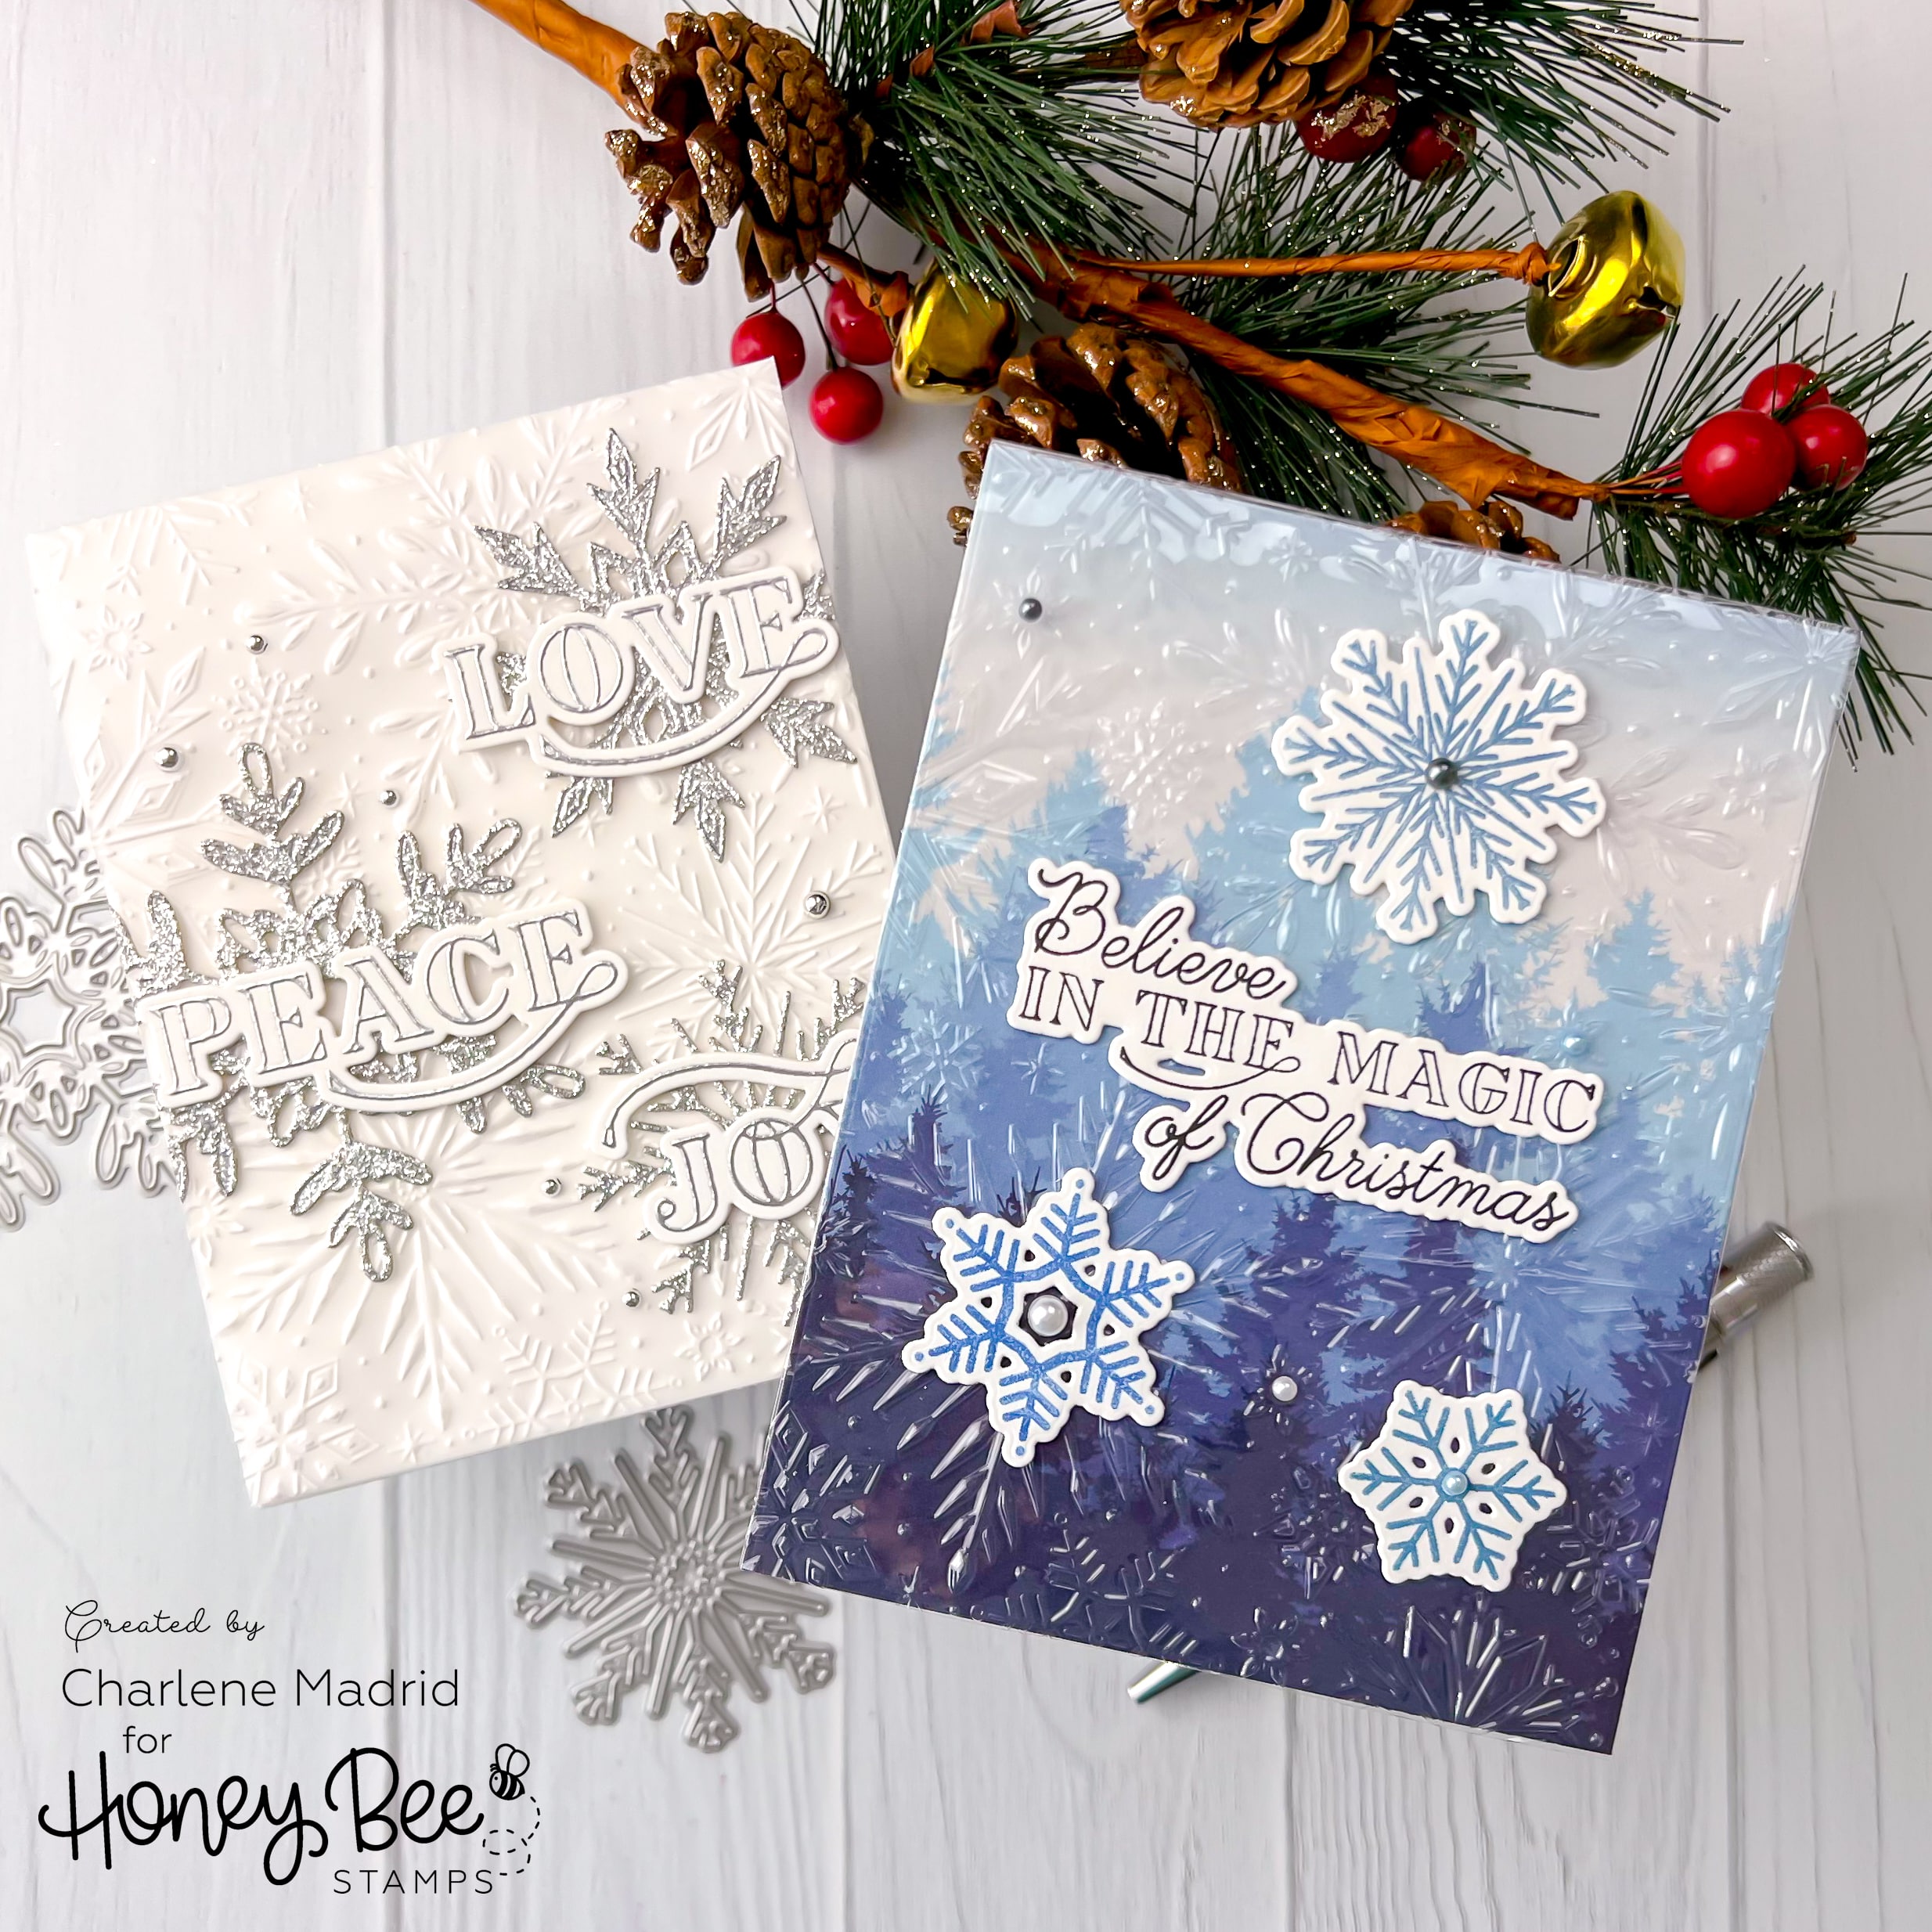 Life Sprinkled With Glitter: 3D Paper Snowflakes& Gift Wrap Ideas